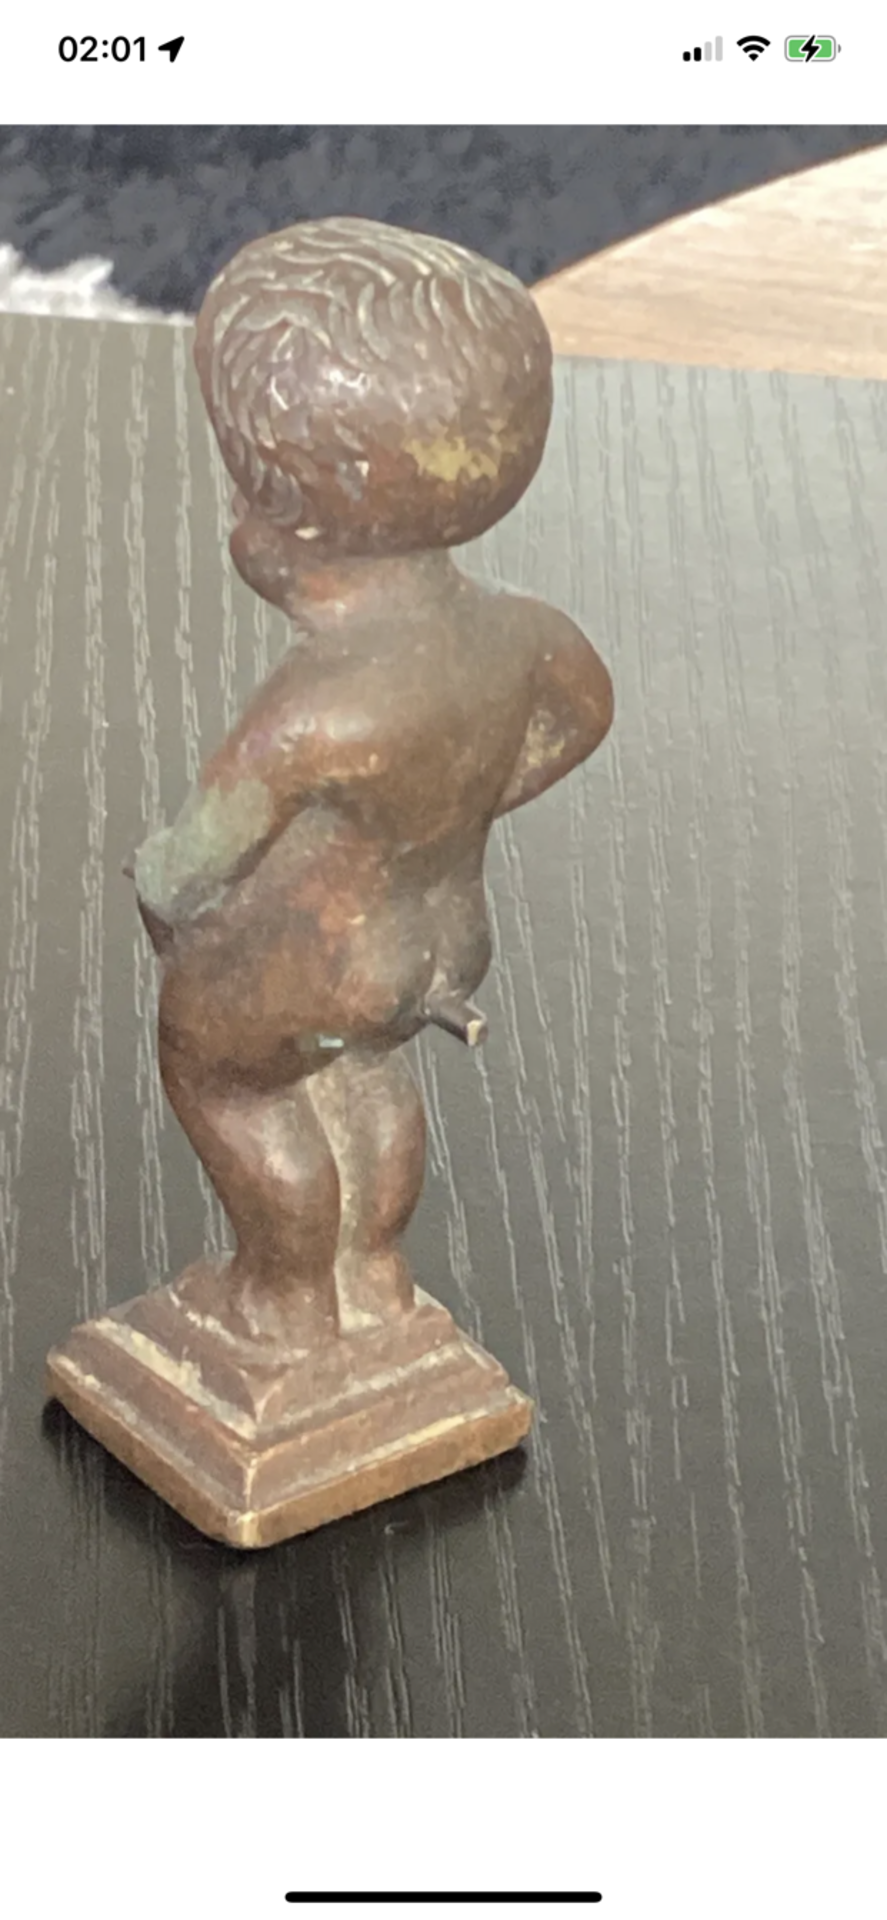 SMASLL ANTIQUE BRONZE CHERUB WITH SPOUT - Image 6 of 7